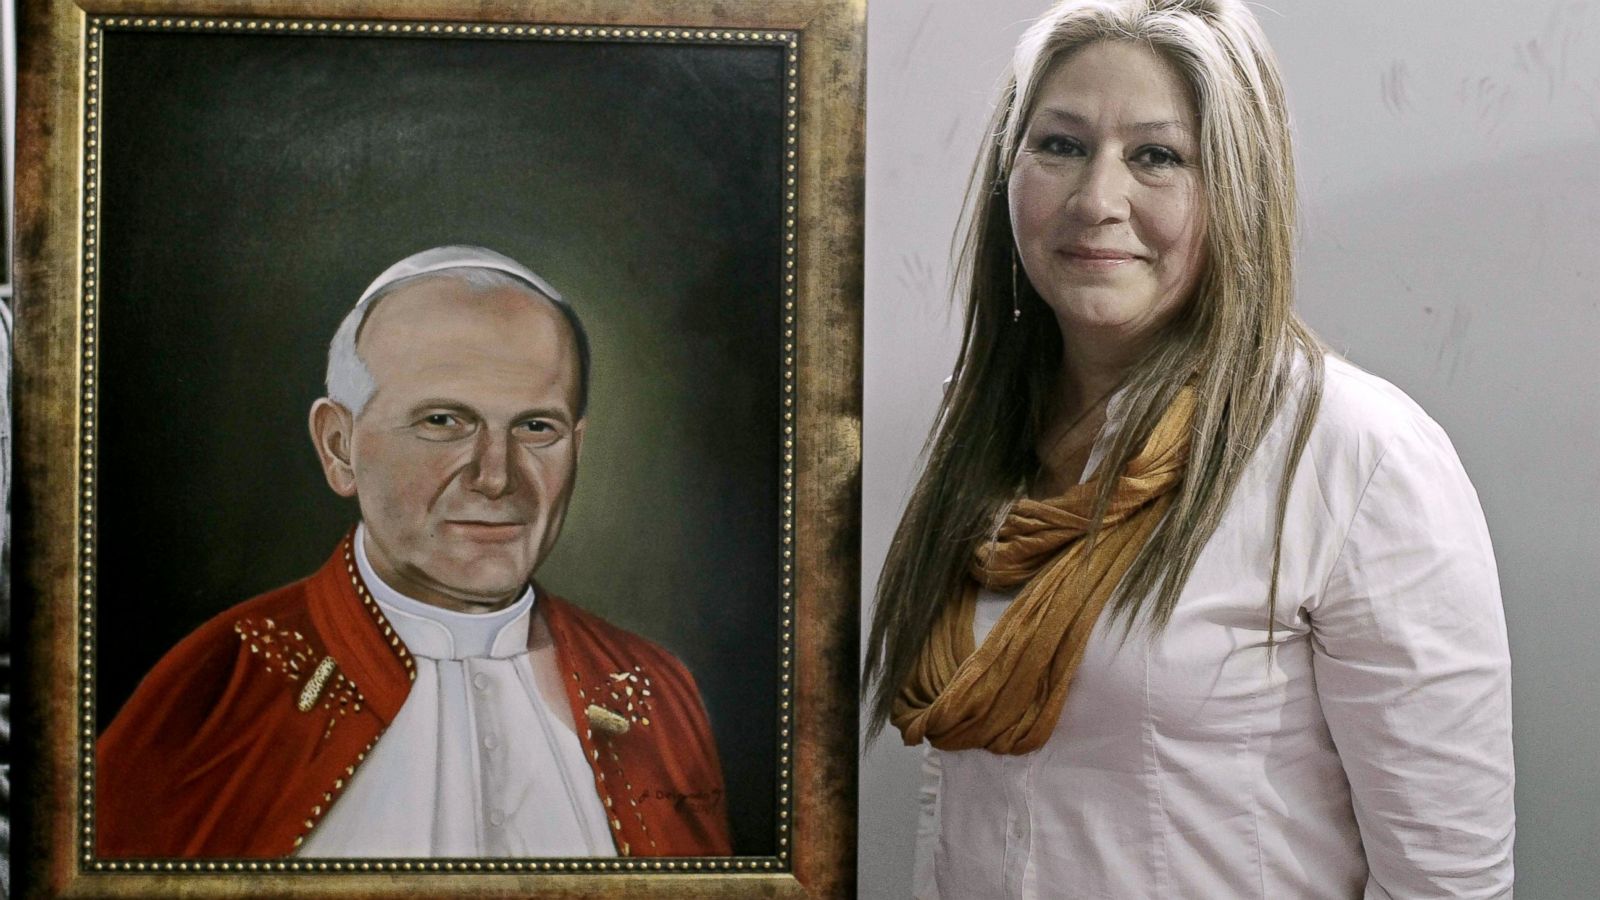 Demokratisk parti tykkelse Termisk Two Women Helped Put Pope John Paul II on the Path to Sainthood - ABC News